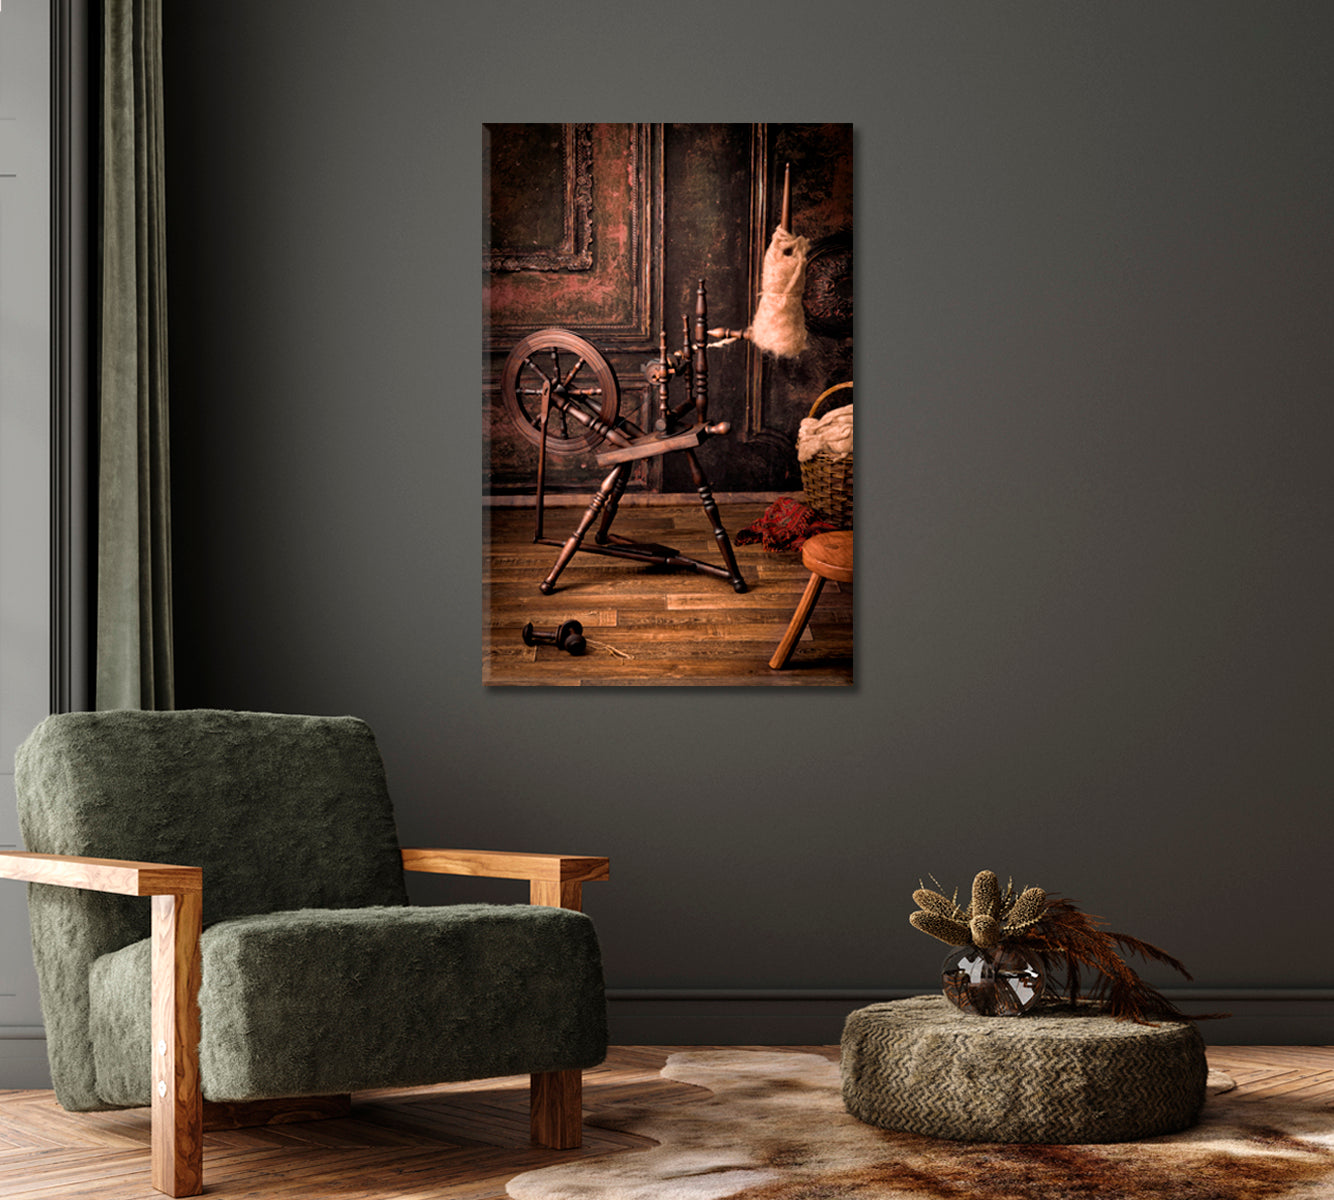 Authentic Old Spinning Wheel Canvas Print-Canvas Print-CetArt-1 panel-16x24 inches-CetArt